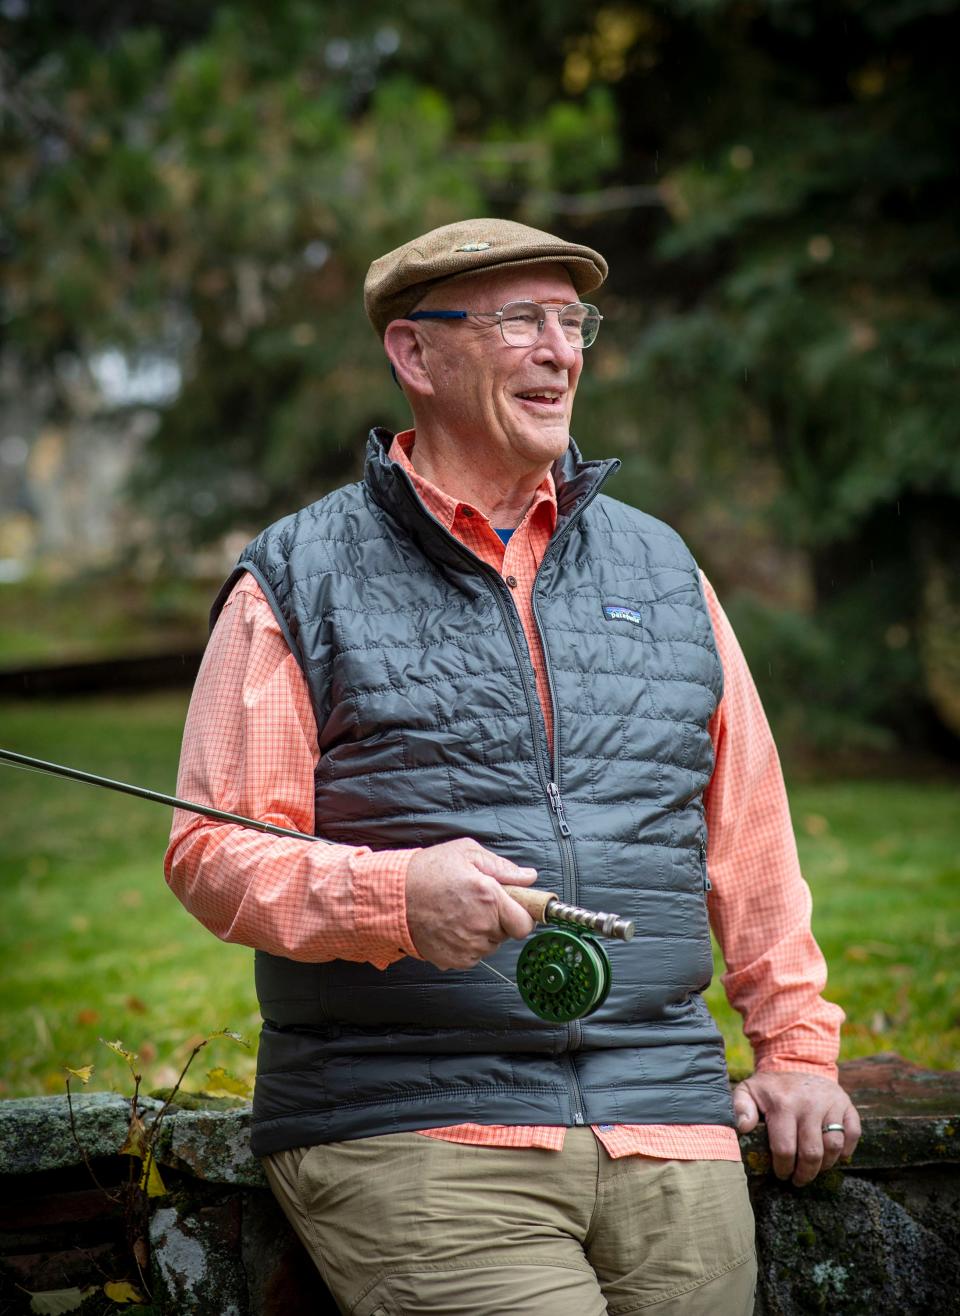 Paul Bruun, pictured at his home in Jackson, Wy., on Oct. 25, has been inducted into the Fly Fishing Hall of Fame.